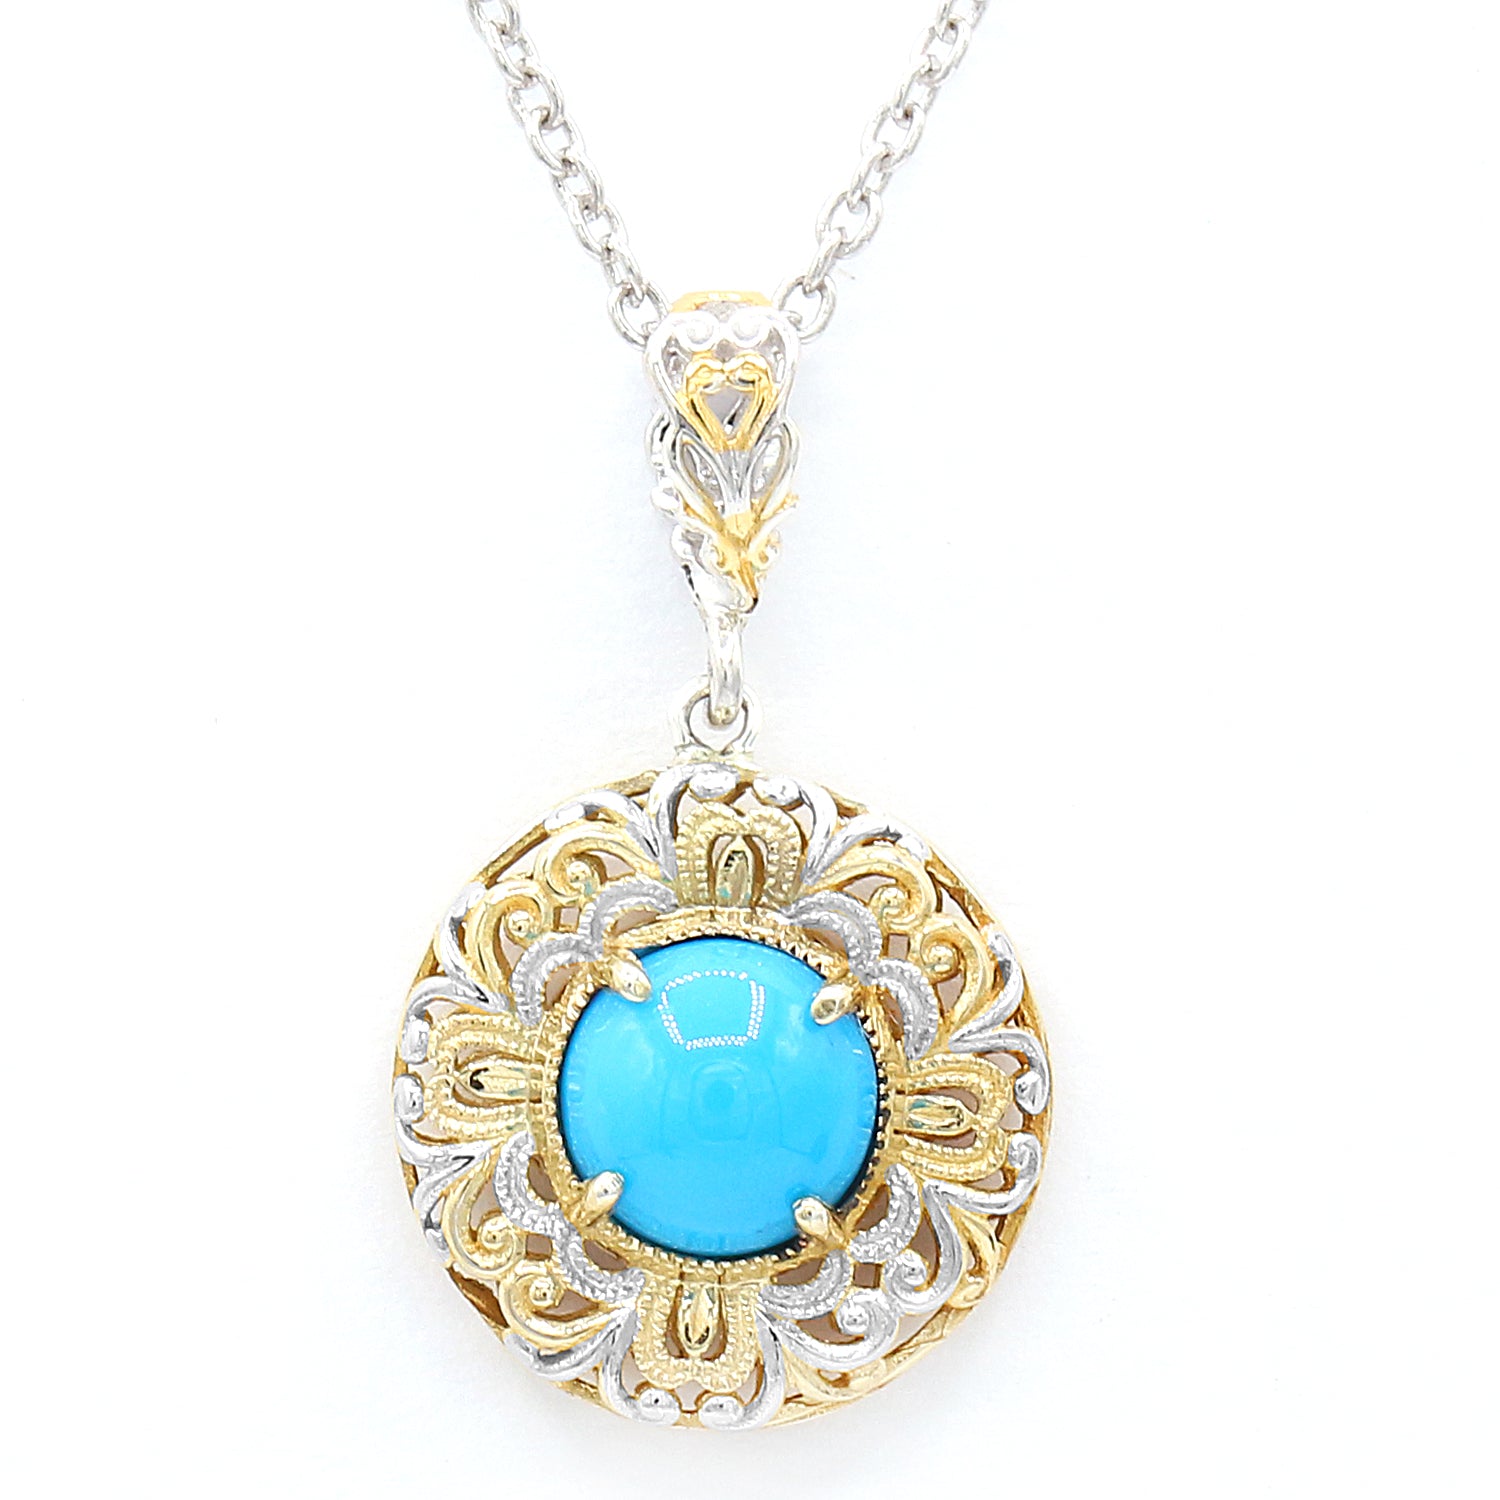 Gems en Vogue One-of-a-kind Round Sleeping Beauty Turquoise Pendant